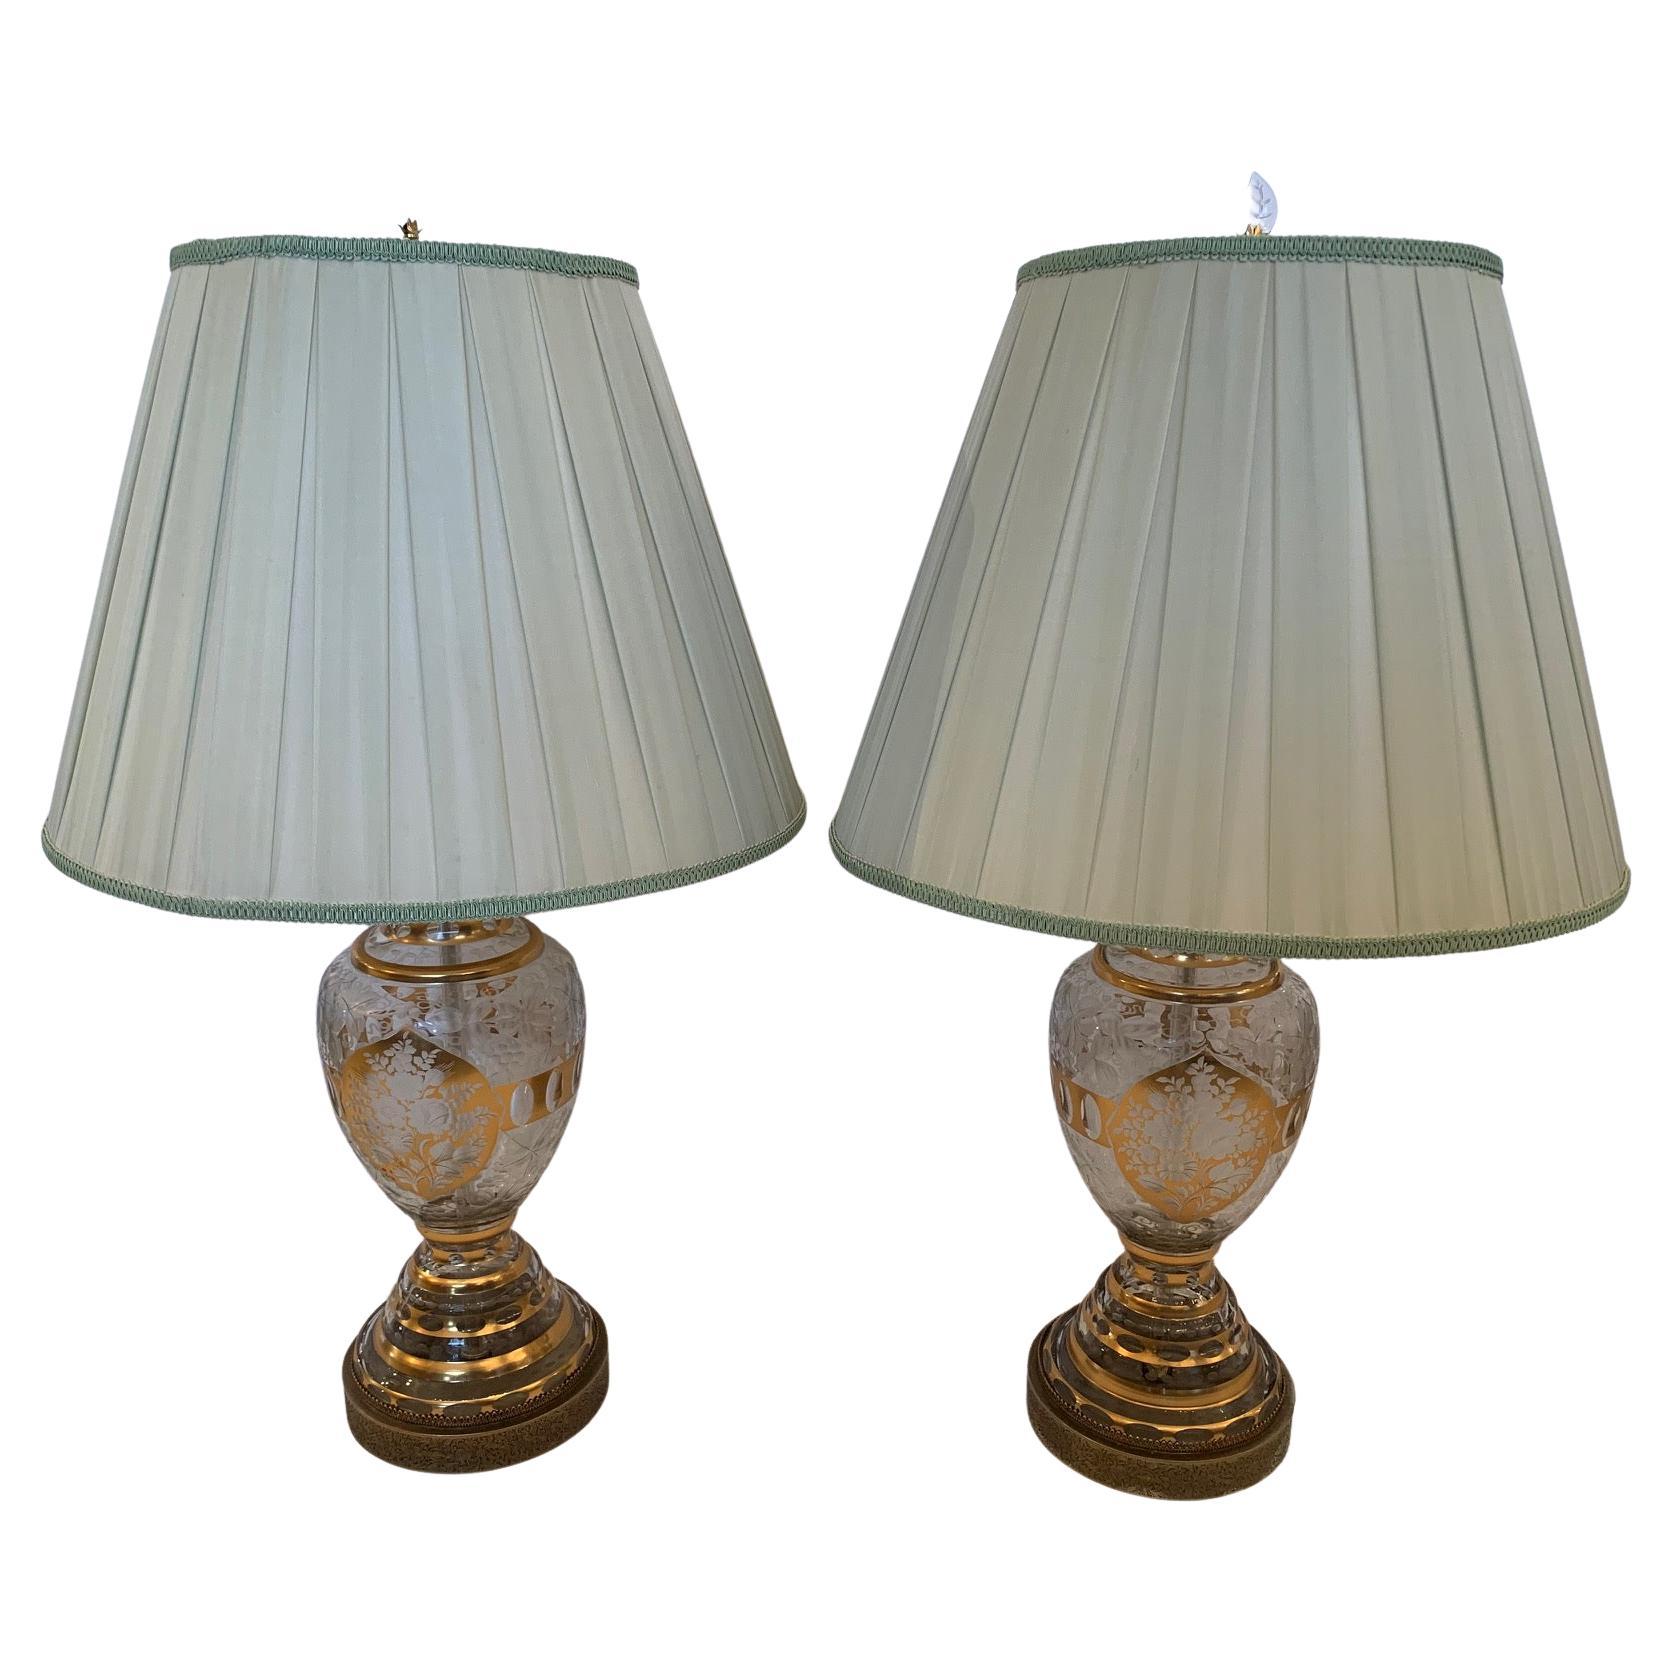 Glamorous Pair of Vintage Crystal Table Lamps For Sale